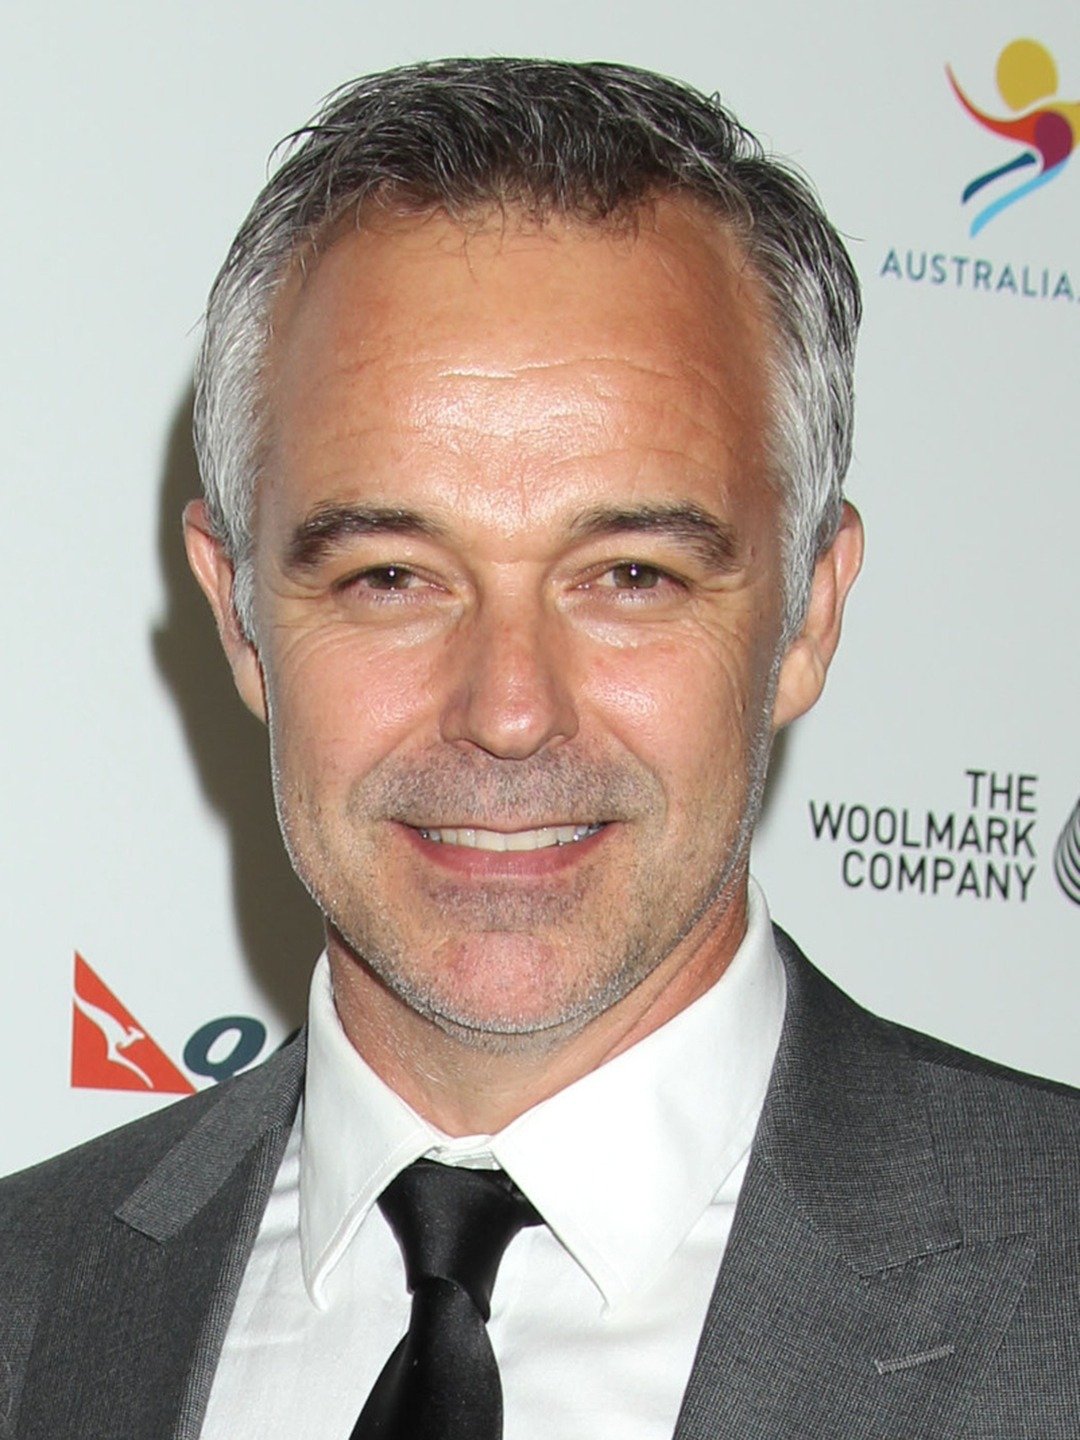 How tall is Cameron Daddo?